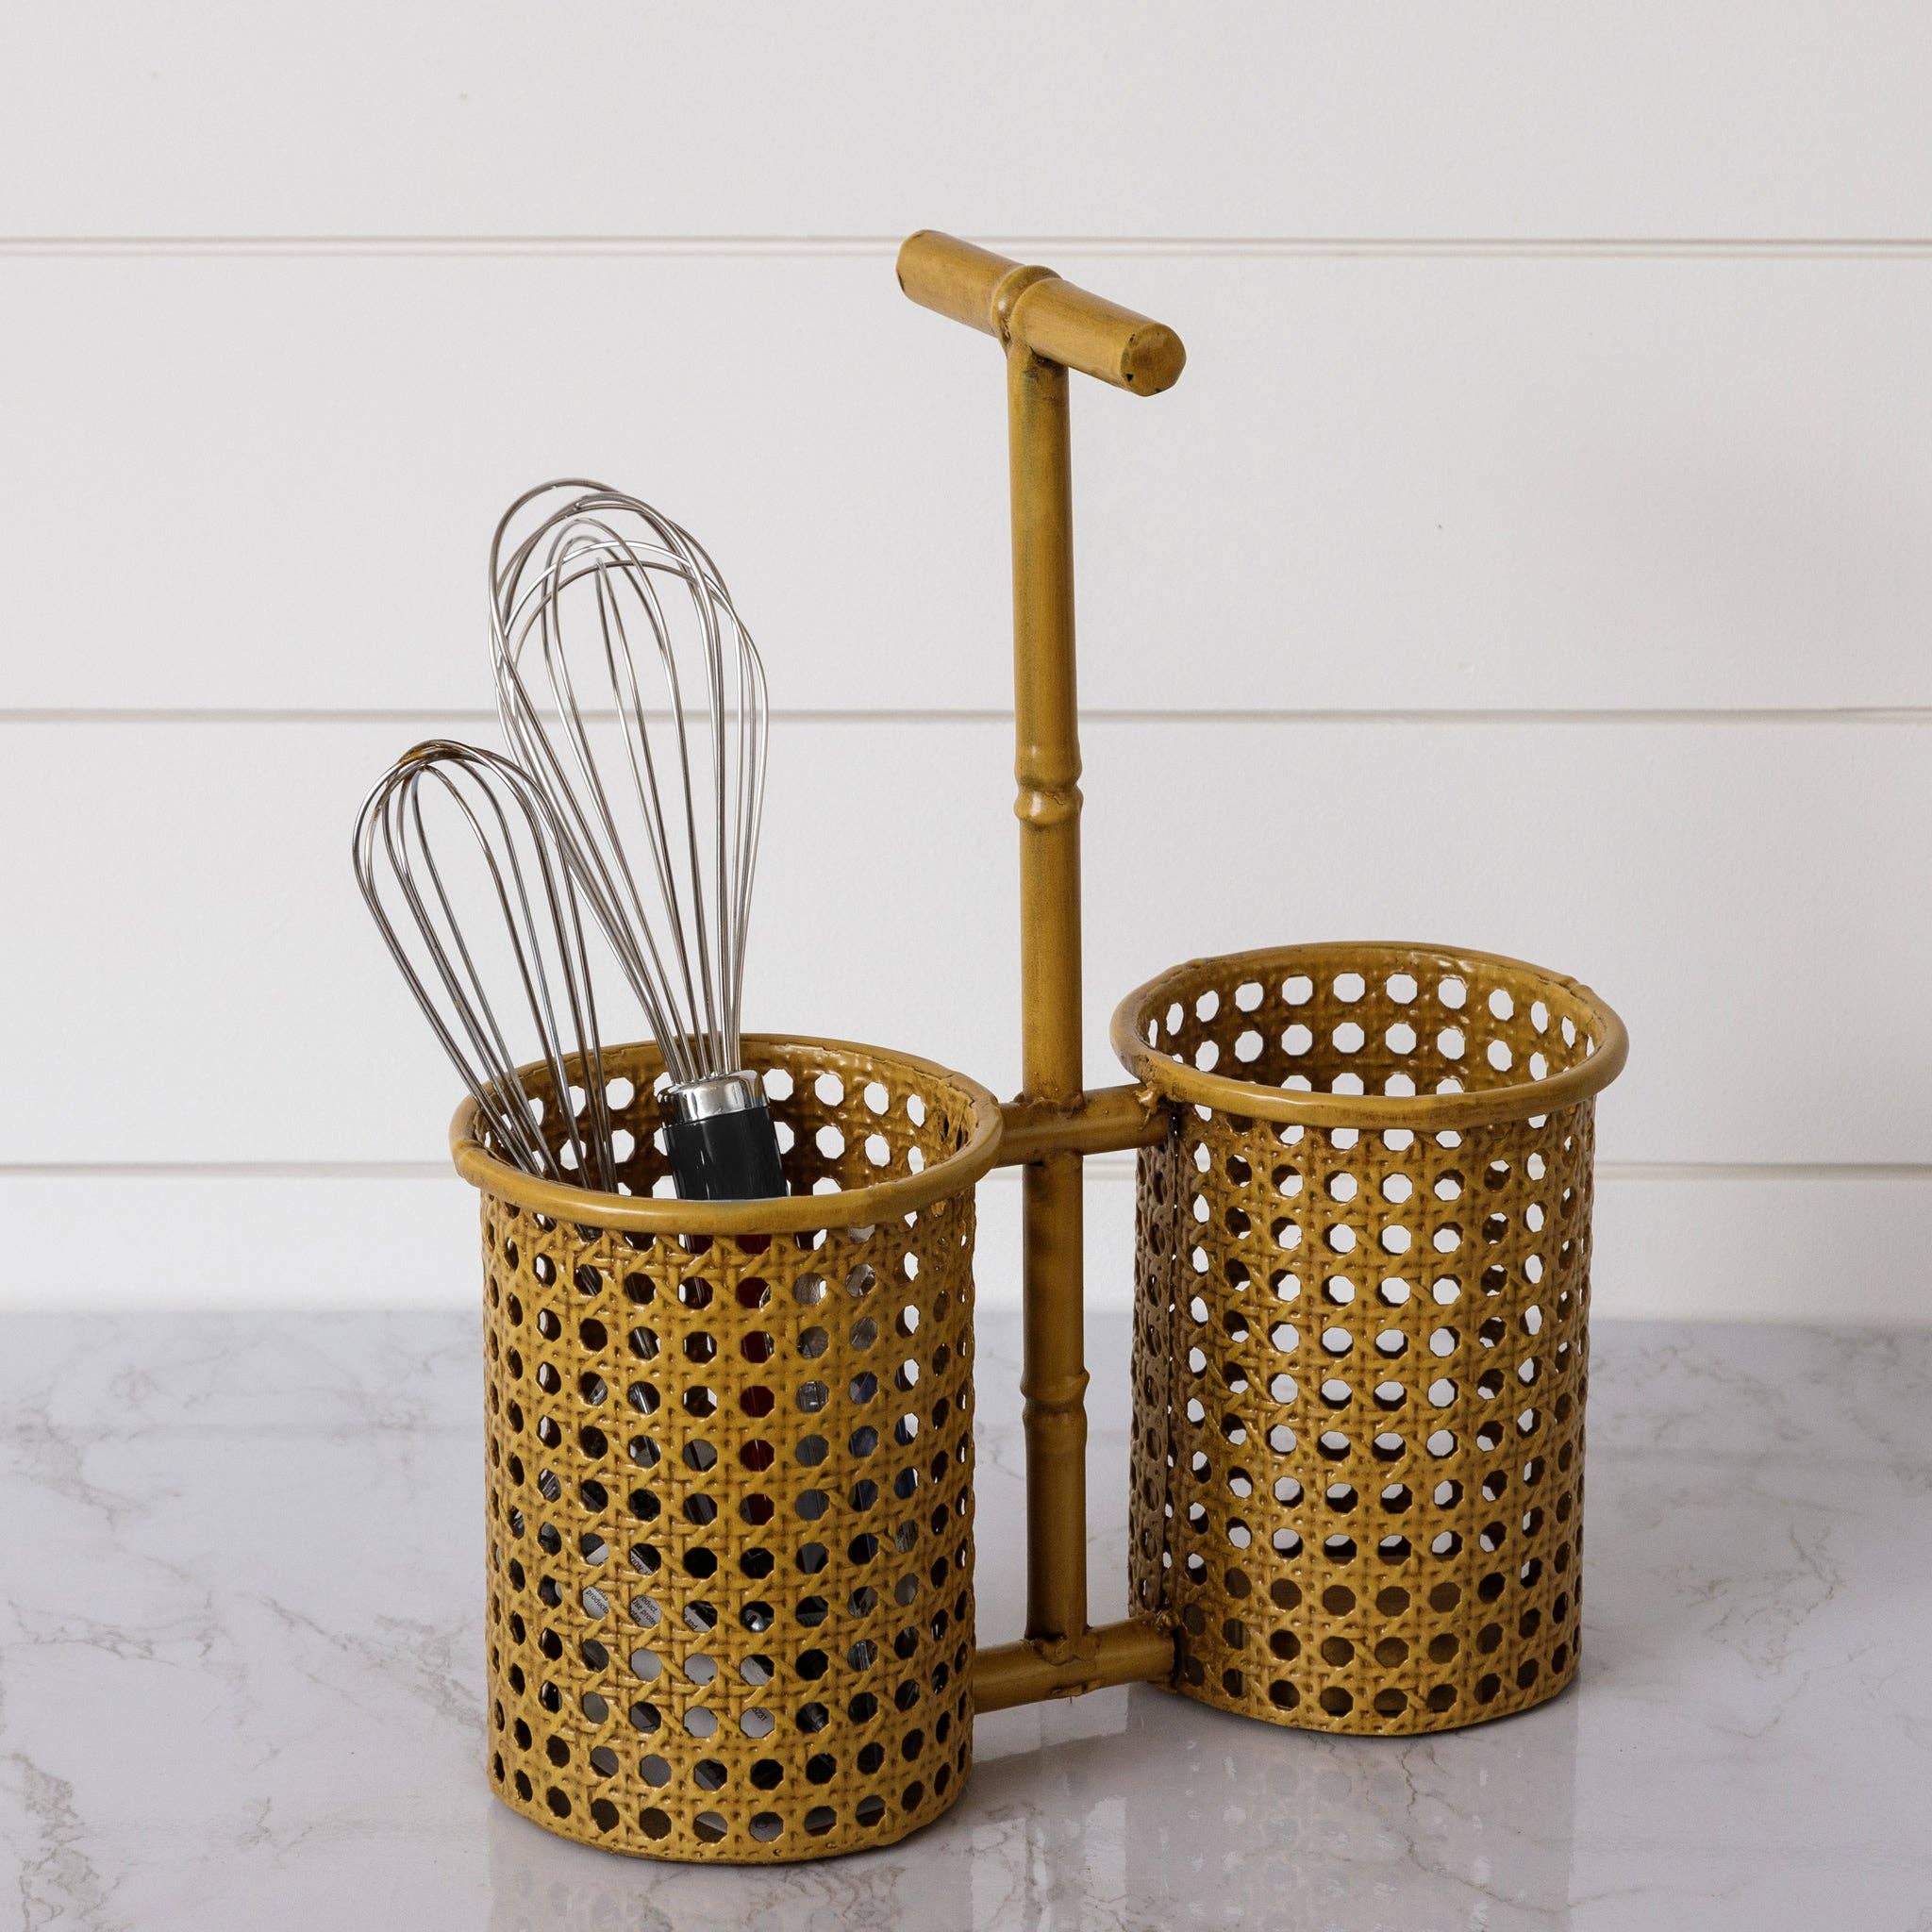 Utensil Holder - Metal Caning And Bamboo (PC)